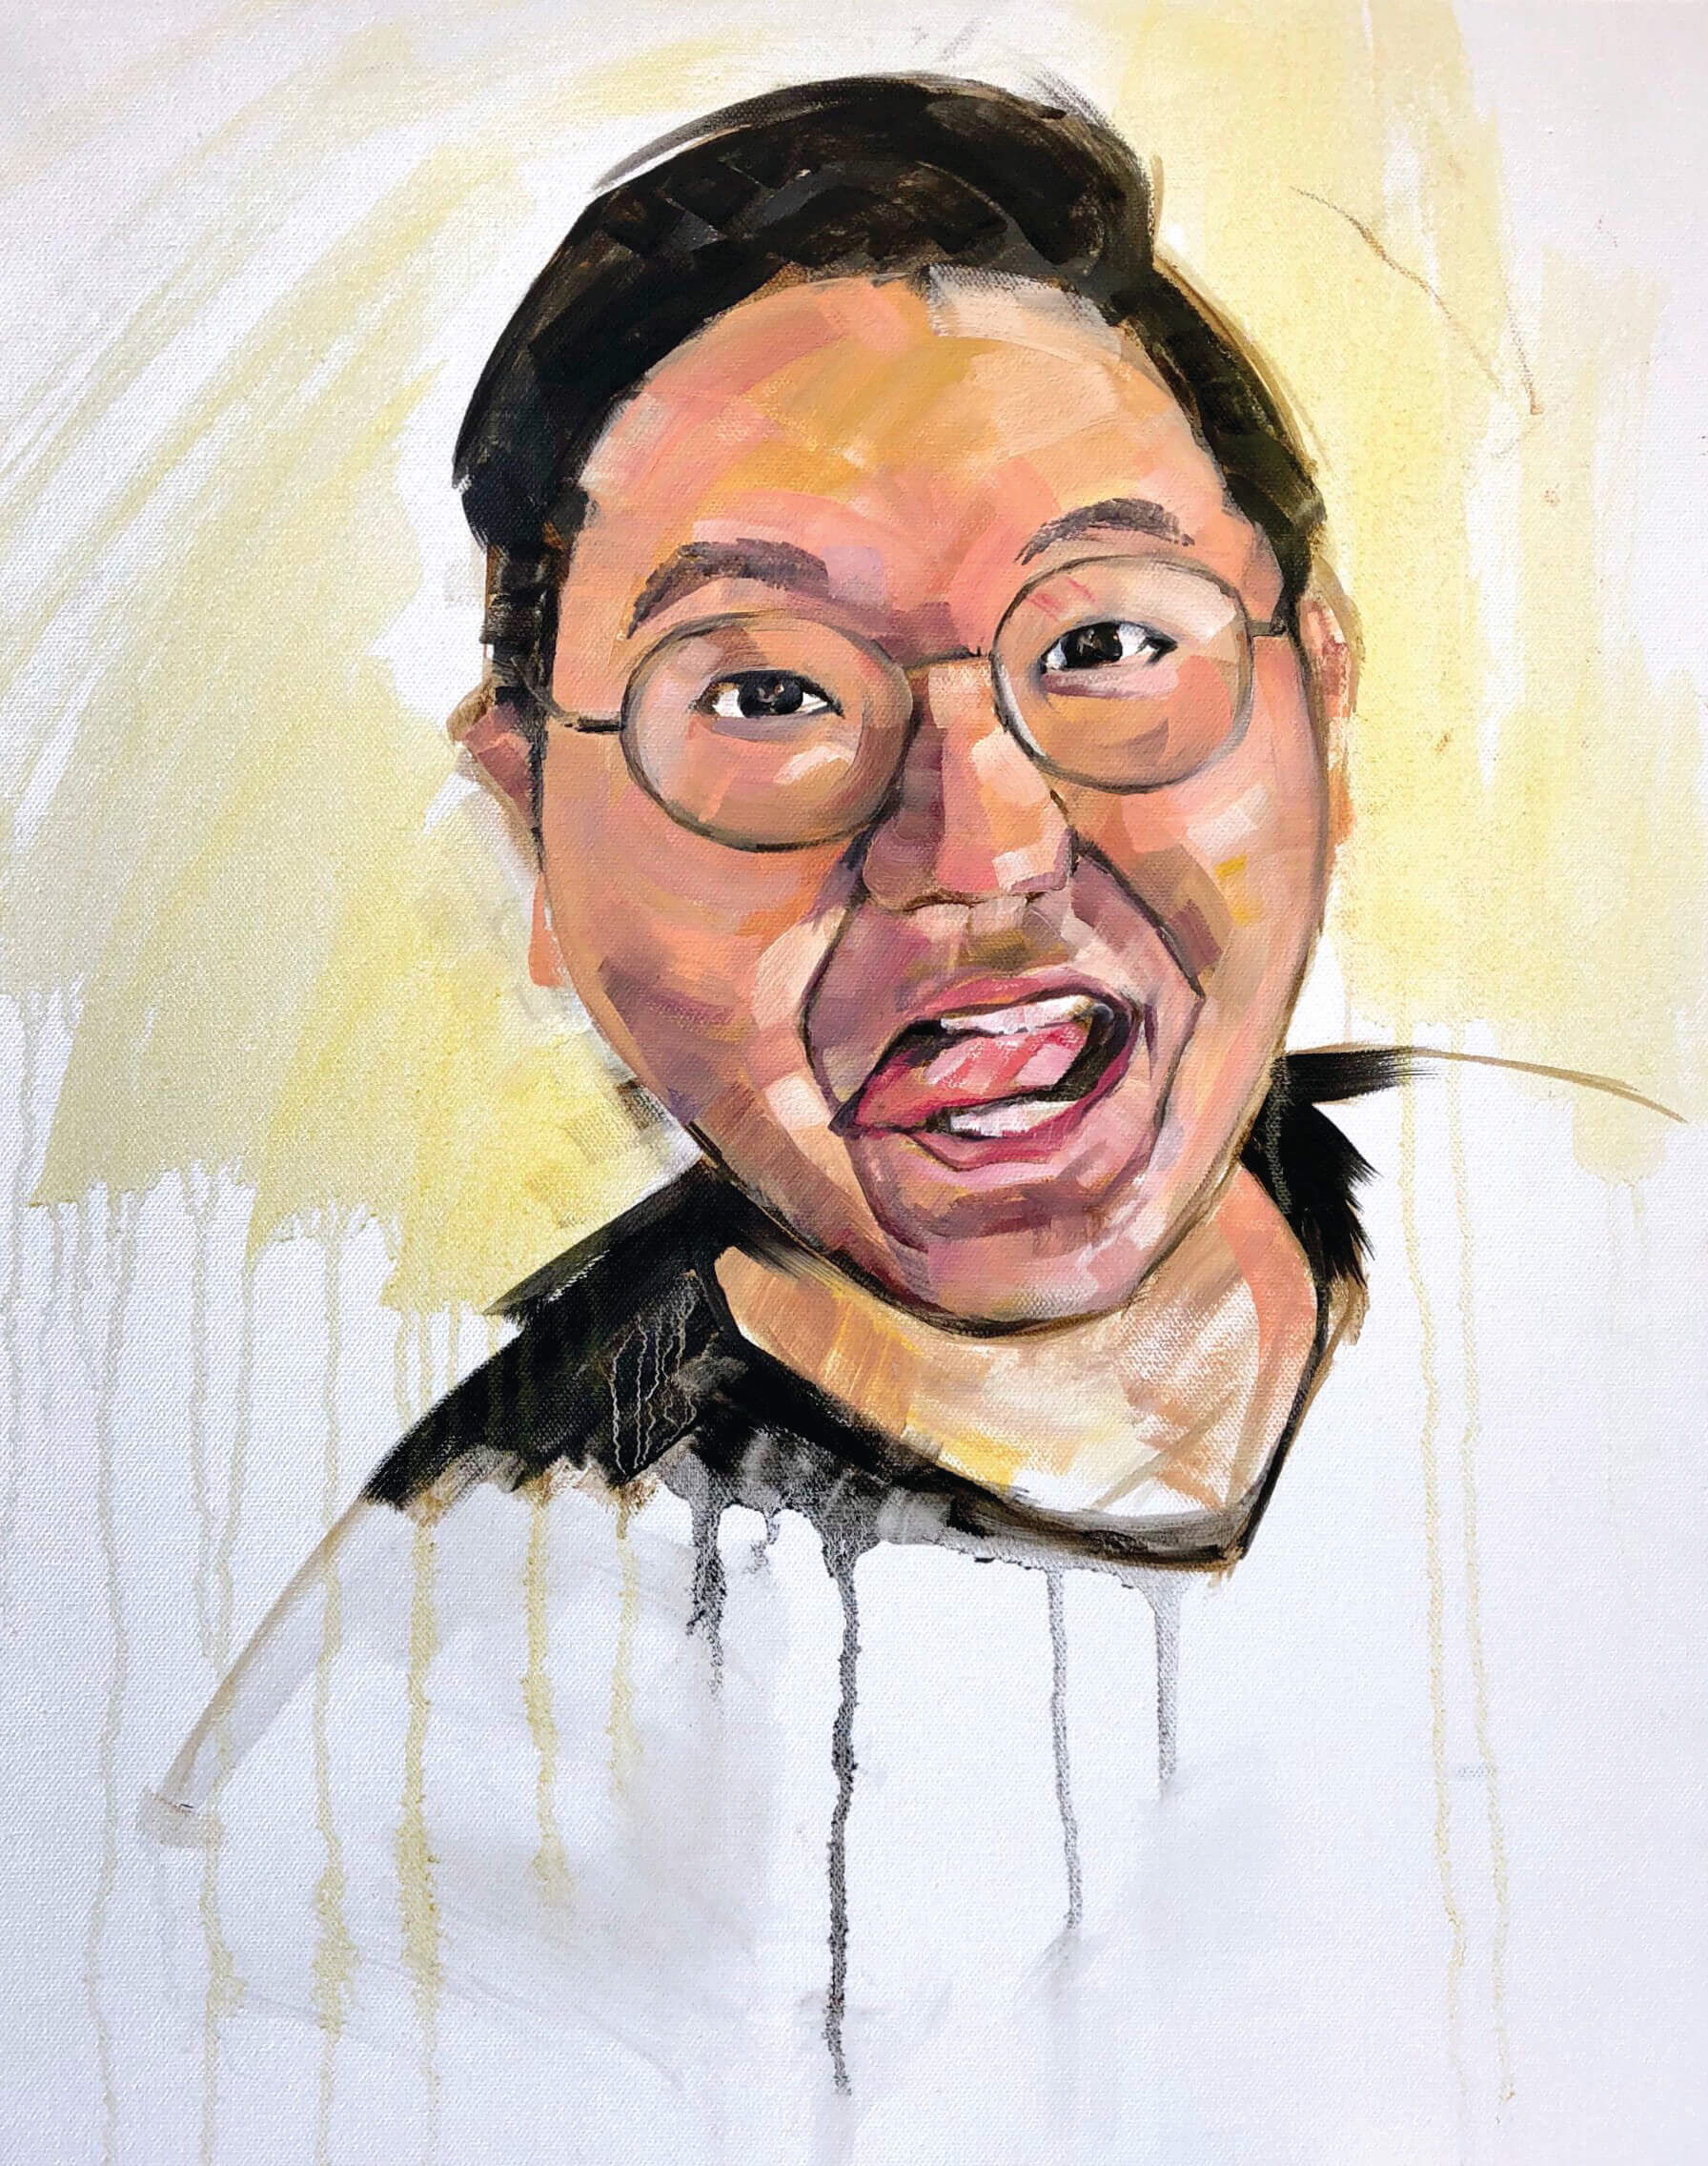 Graphic design portrait of a man wearing glasses, a white t-shirt and sticking his tongue out.